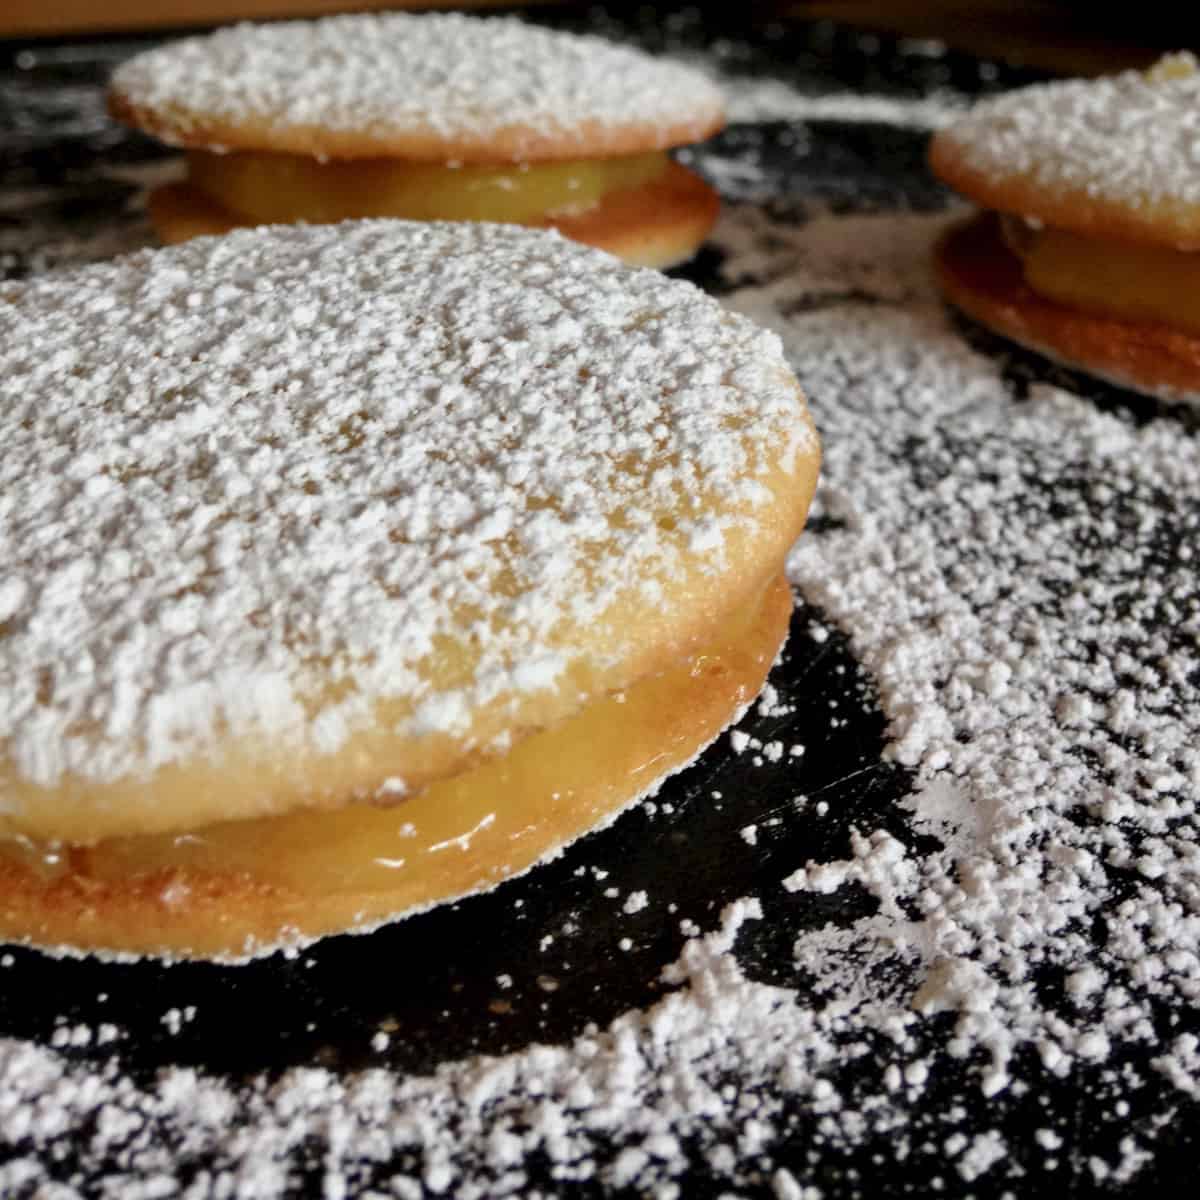 Freshest corn whoopie pies filled with lemon curd and dusted with powdered sugar.